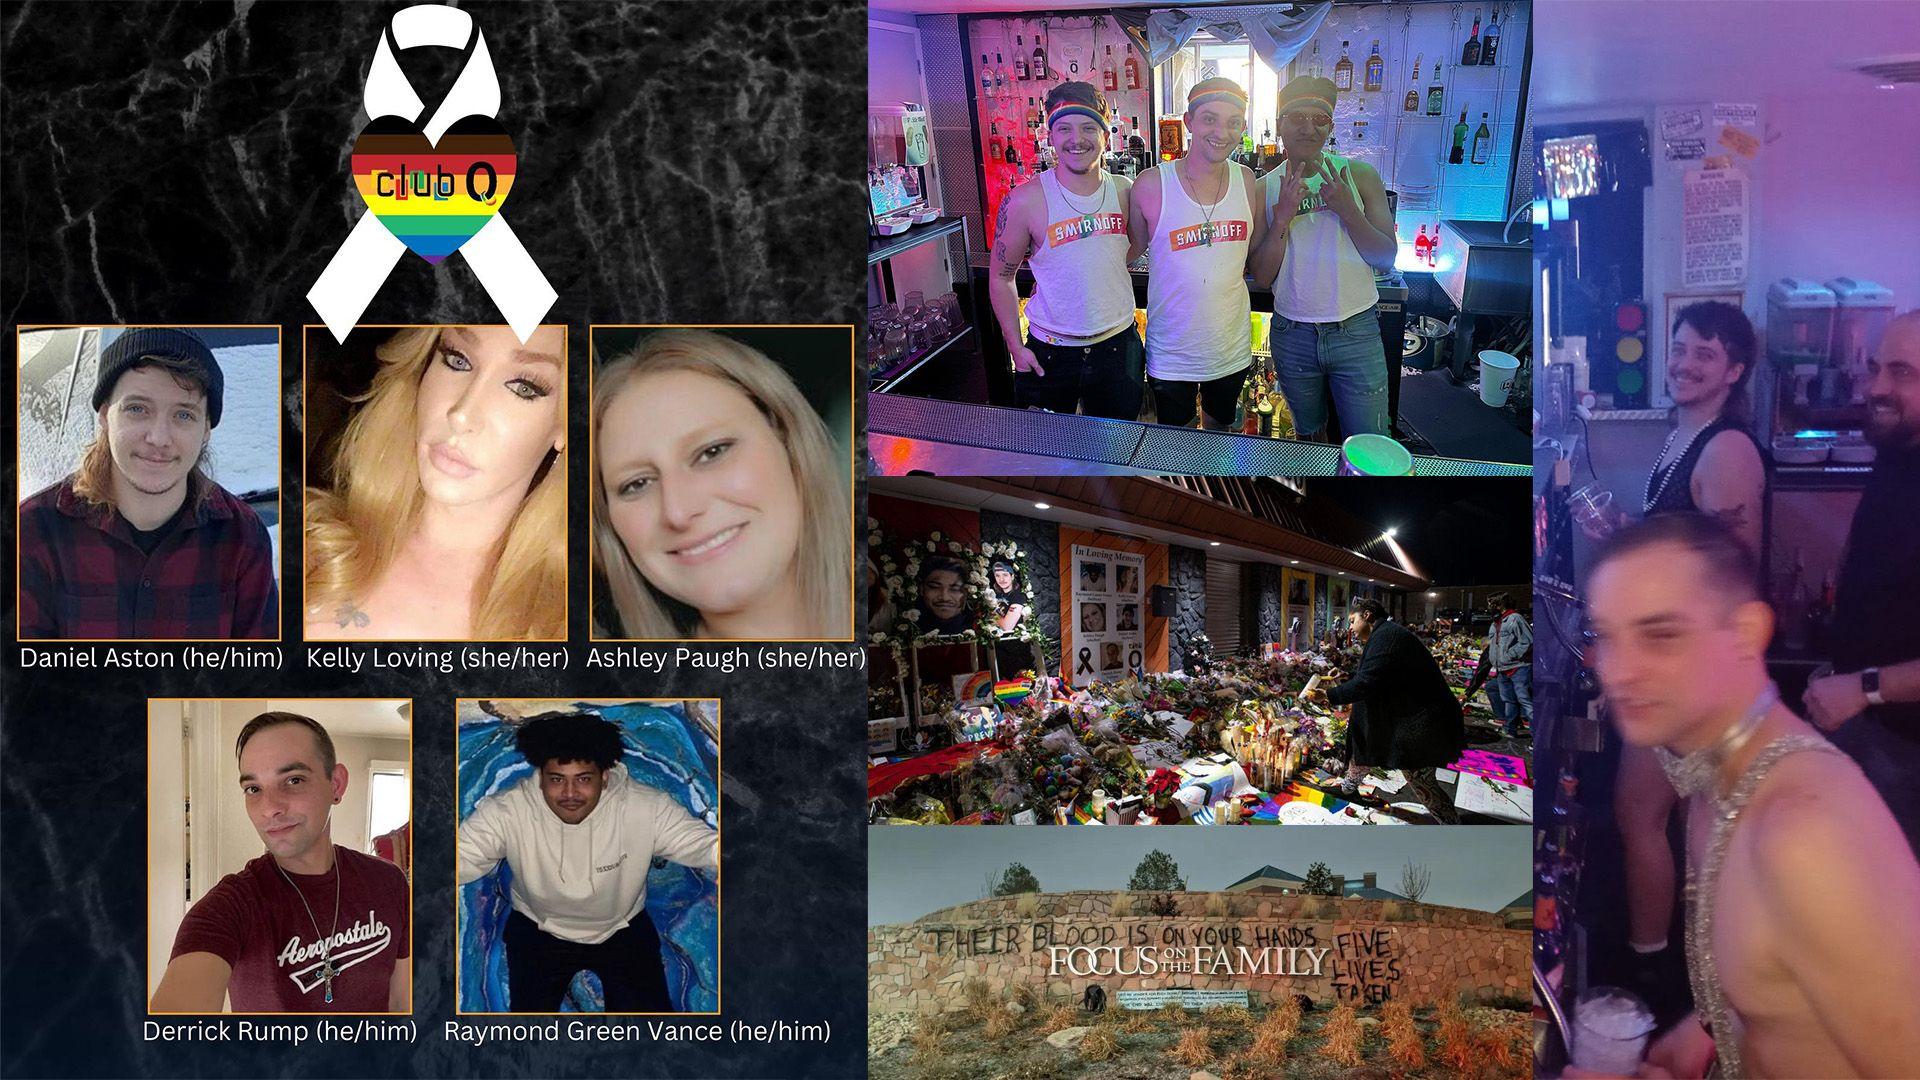 Another Two Weeks Plagued by Violent Extremism—Or, On Being LGBTQ+